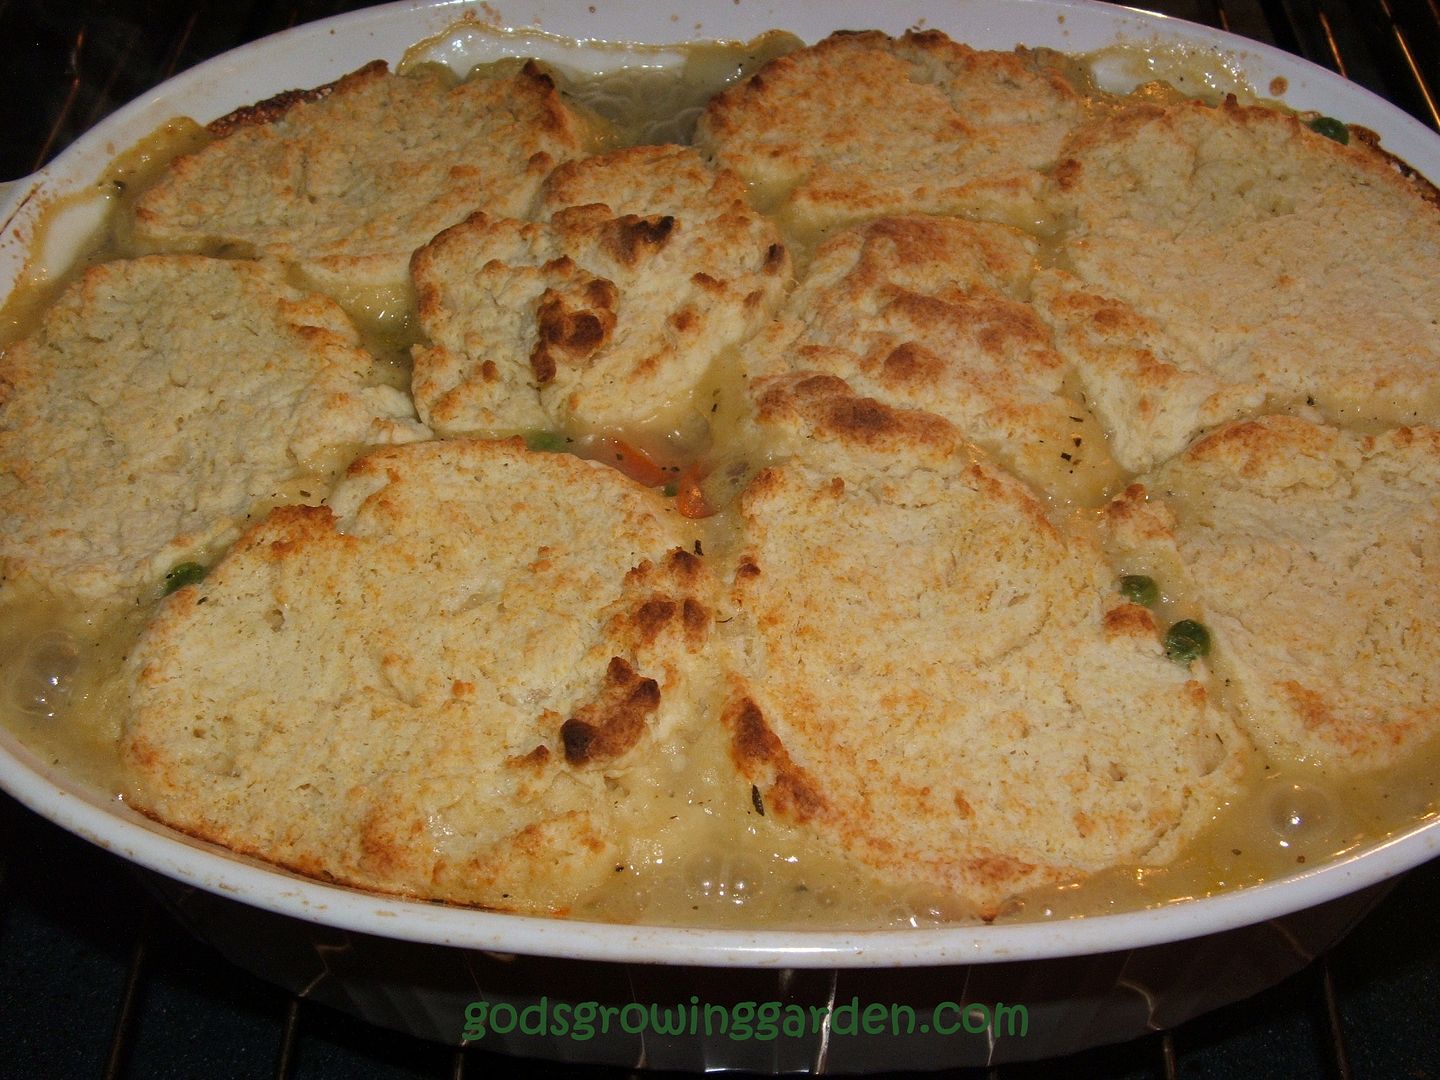 Springtime Chicken Pot Pie by Angie Ouellette-Tower for godsgrowinggarden.com photo 011_zps31ba15c2.jpg